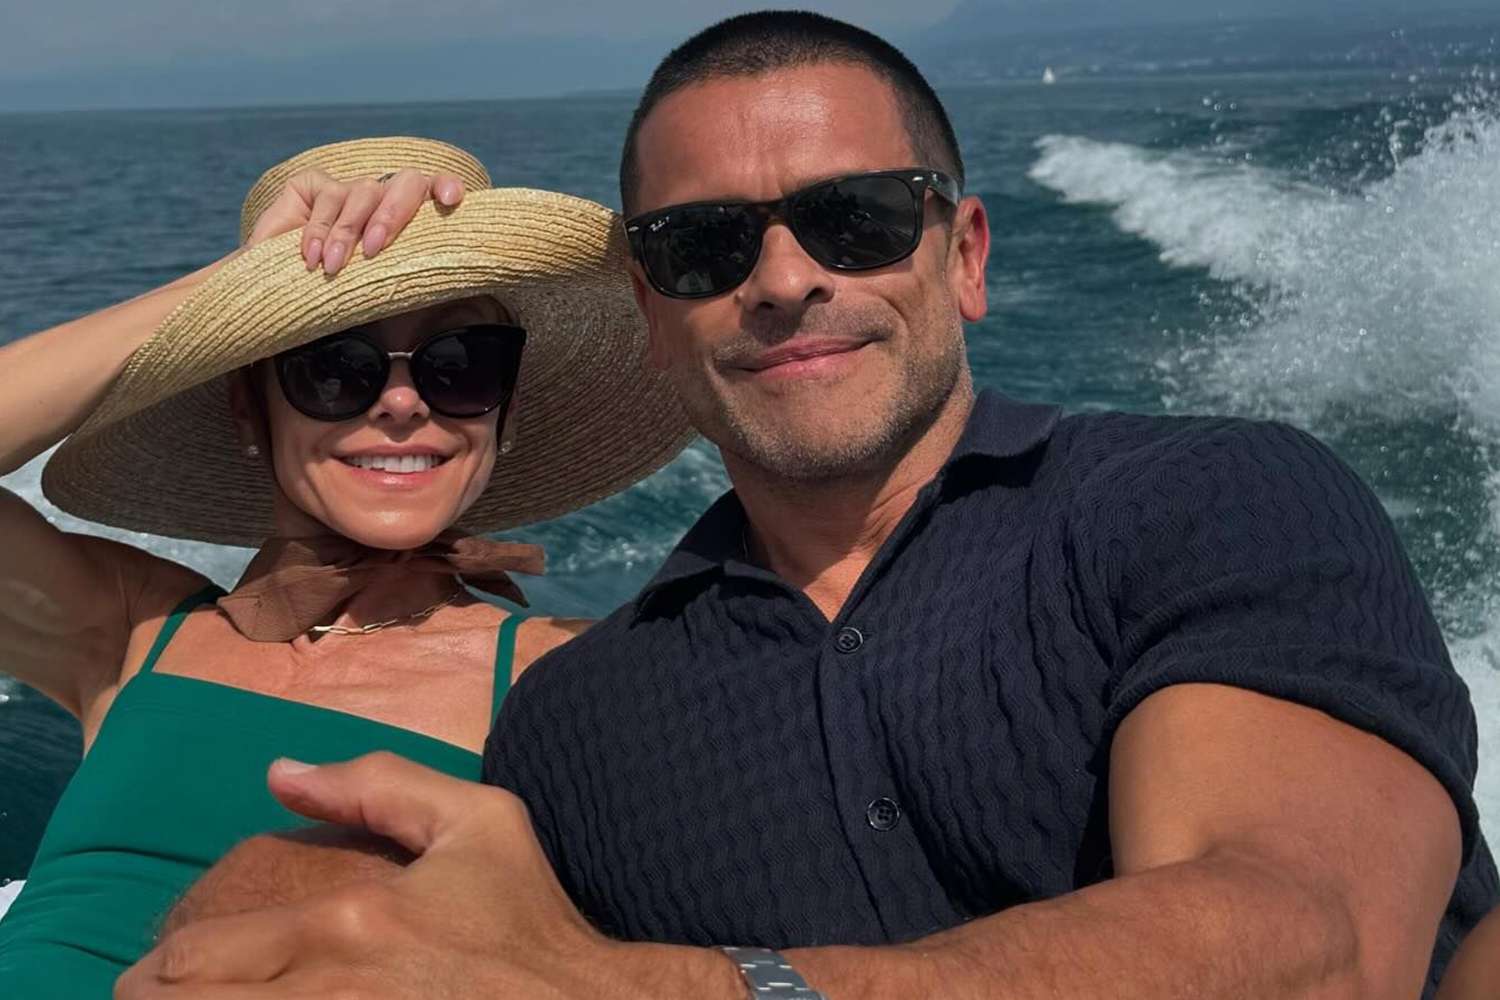 Kelly Ripa and Mark Consuelos Visit Daughter Lola in Switzerland, Where She 'Goes Quite a Bit'